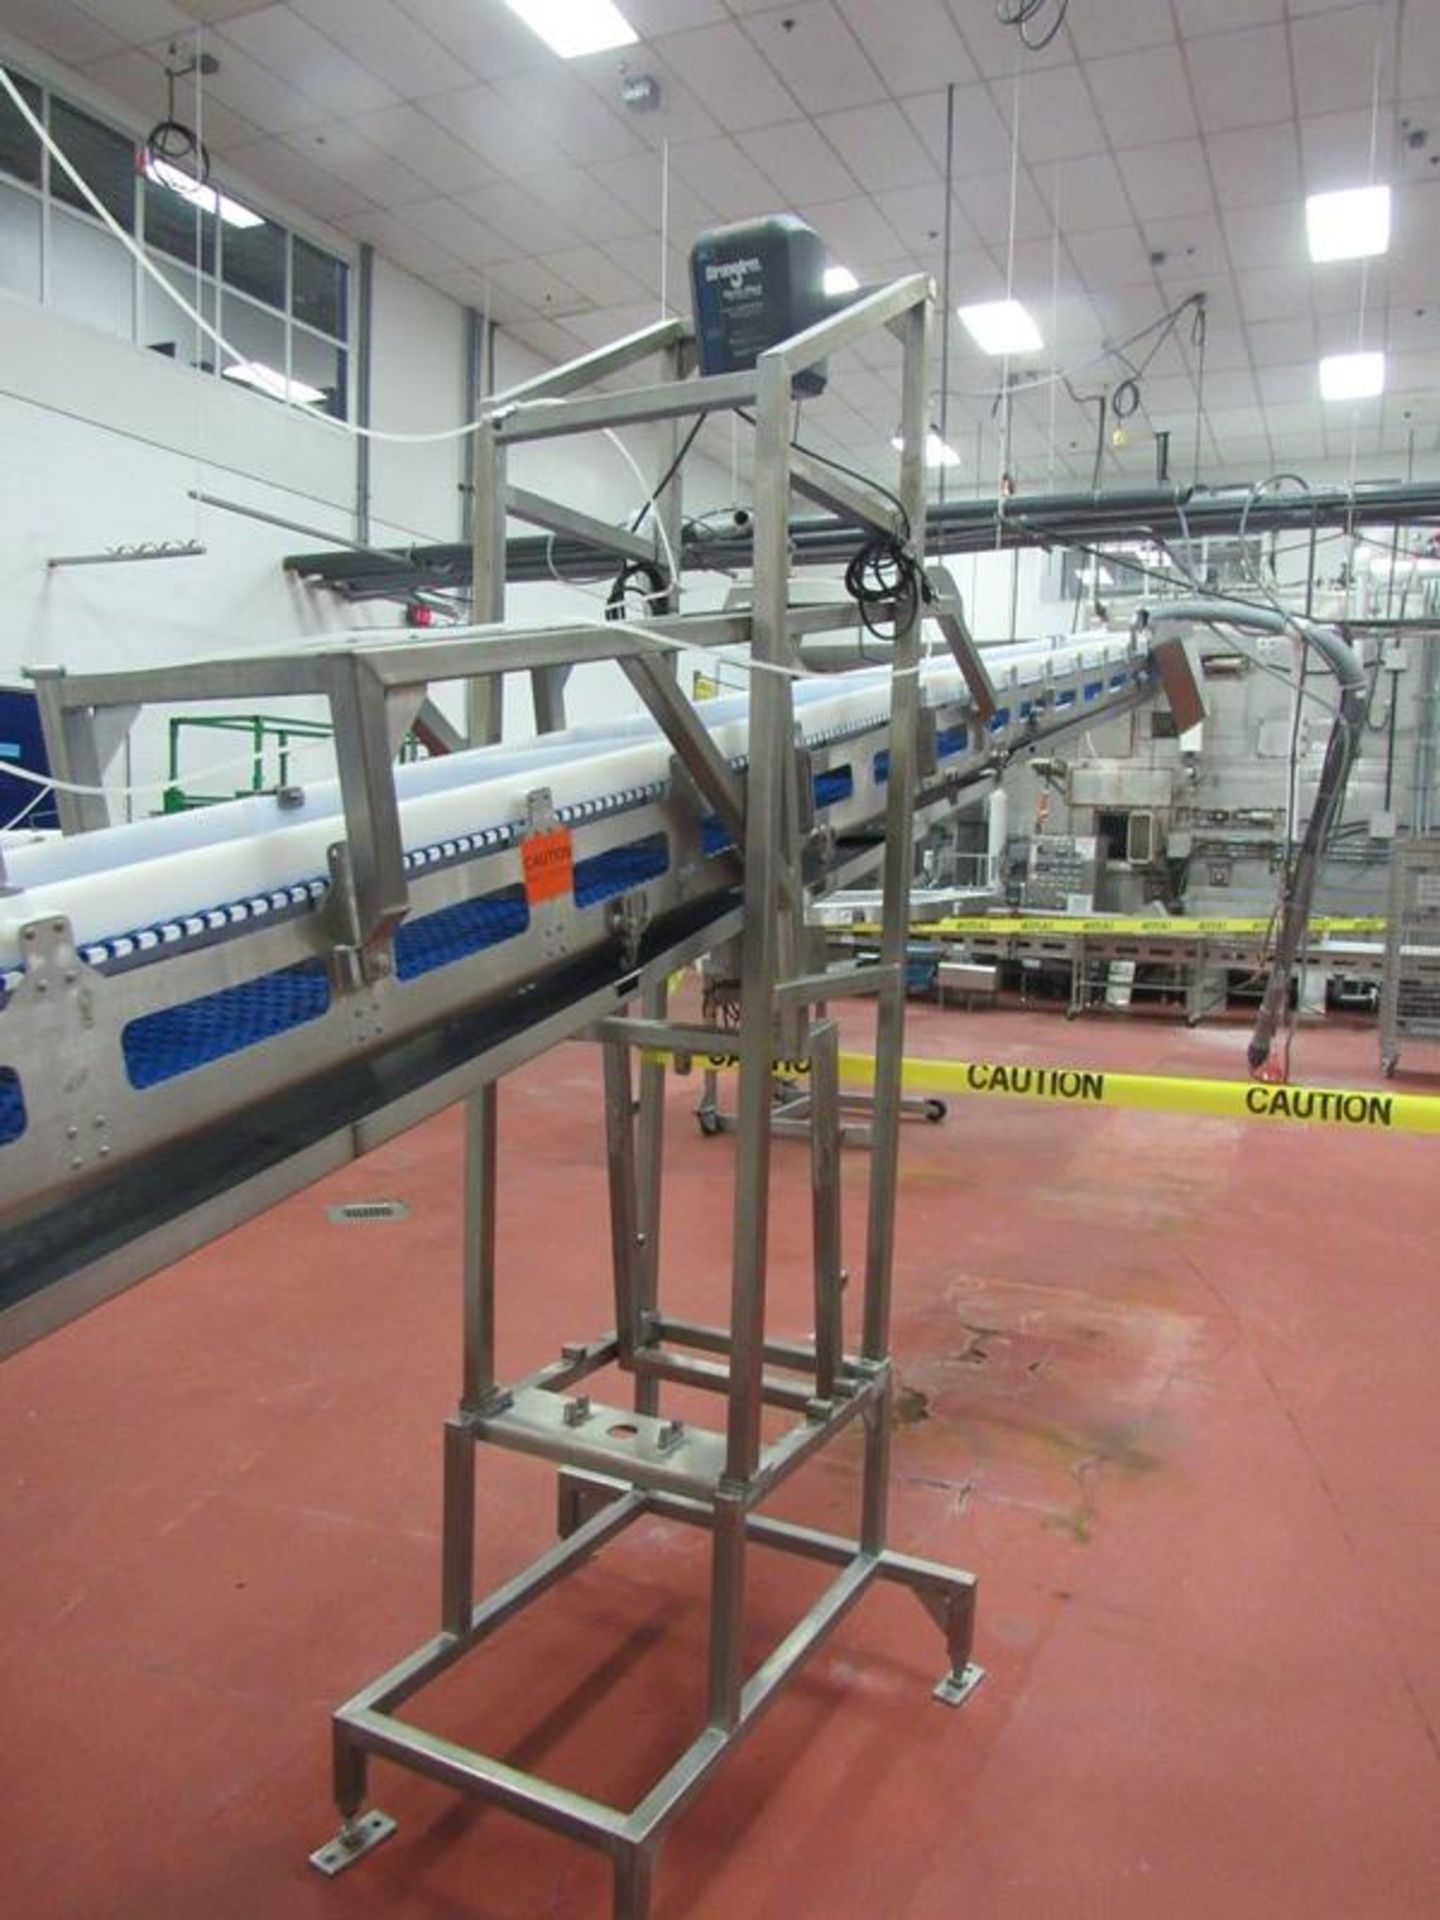 Portable Stainless Steel Conveyor, 9" W X 38" L plastic belt, V.F.D. (Required Loading Fee $50.00 - Image 4 of 7